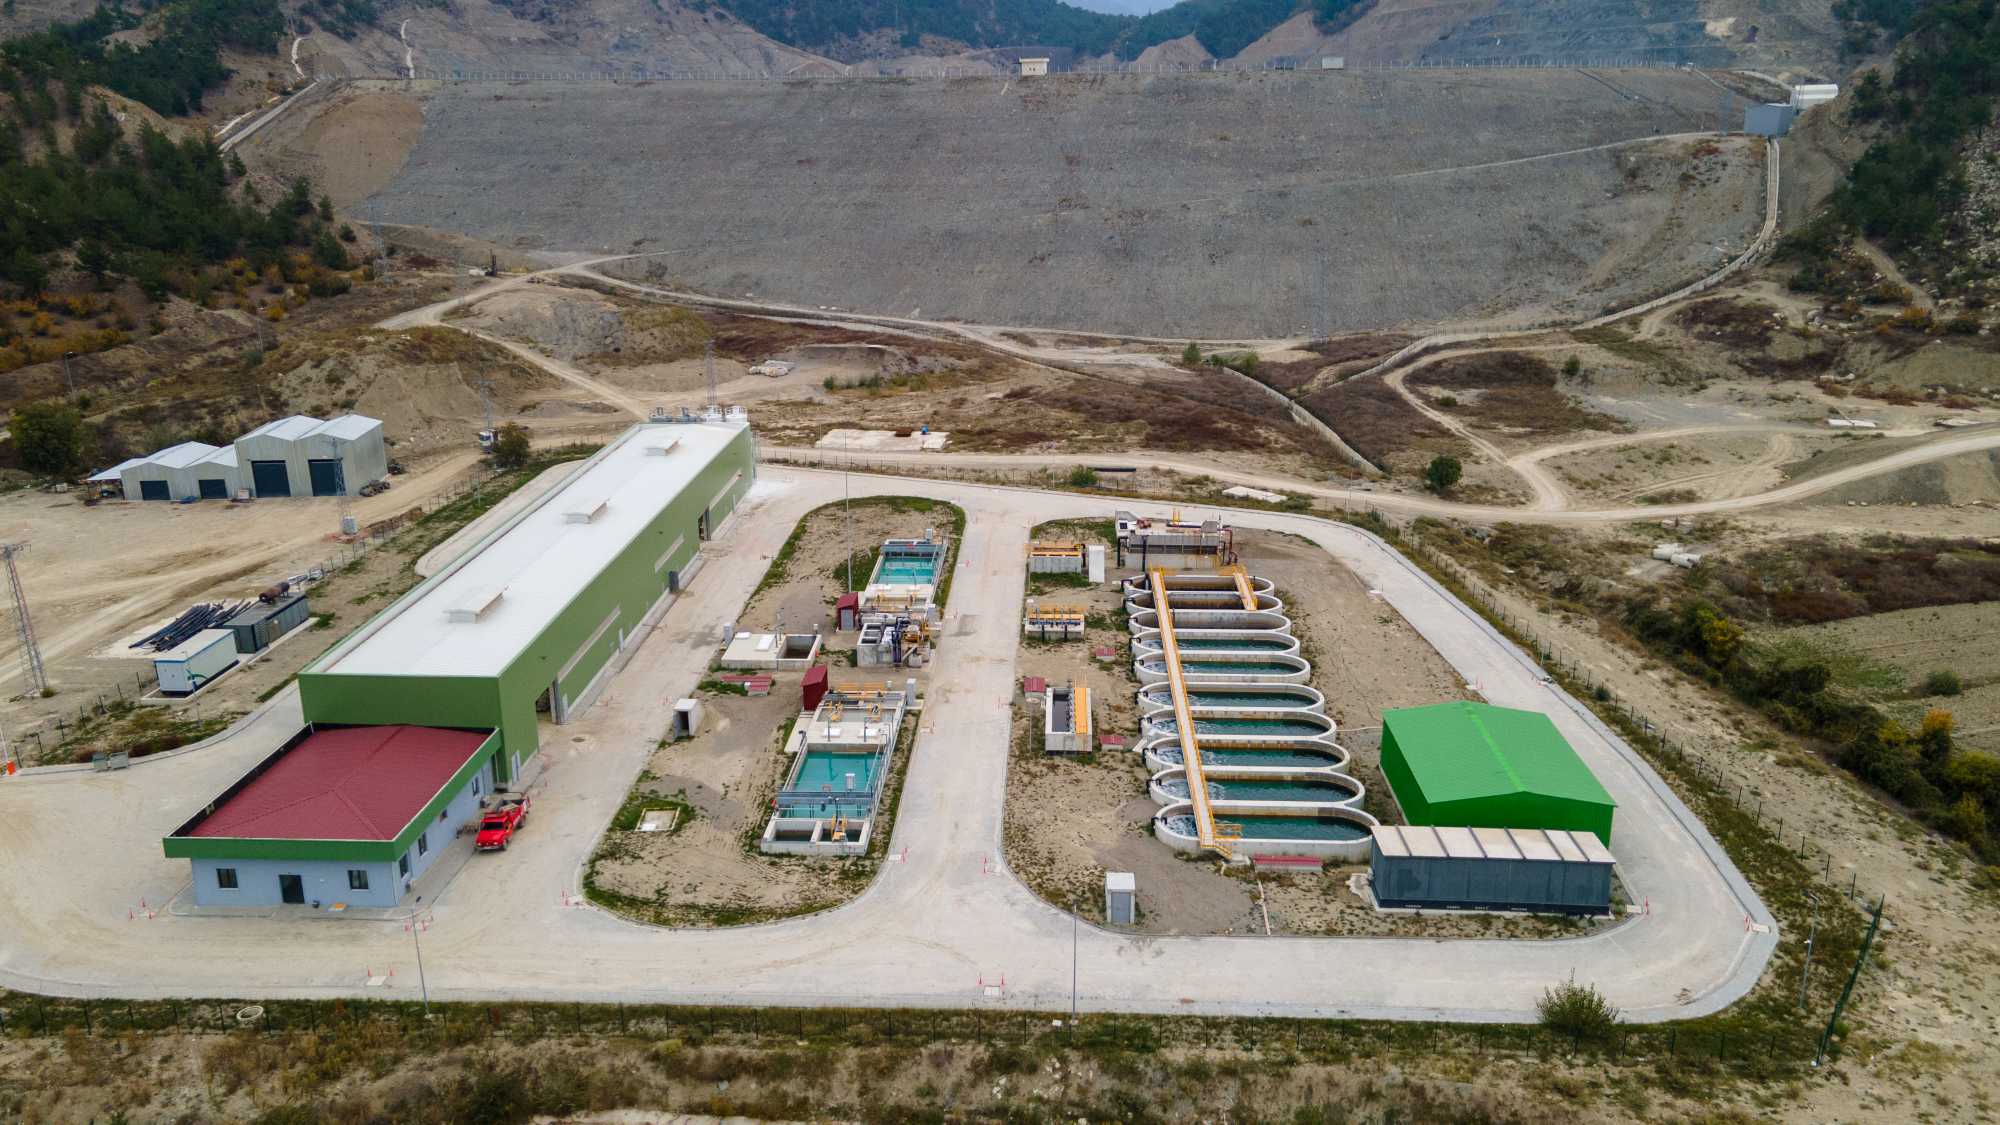 ACACIA MINING OPERATIONS-TAILINGS STORAGE FACILITY(TSF) YILANLI WASTE WATER TREATMENT-RECOVERY PLANT-9600 m3/day